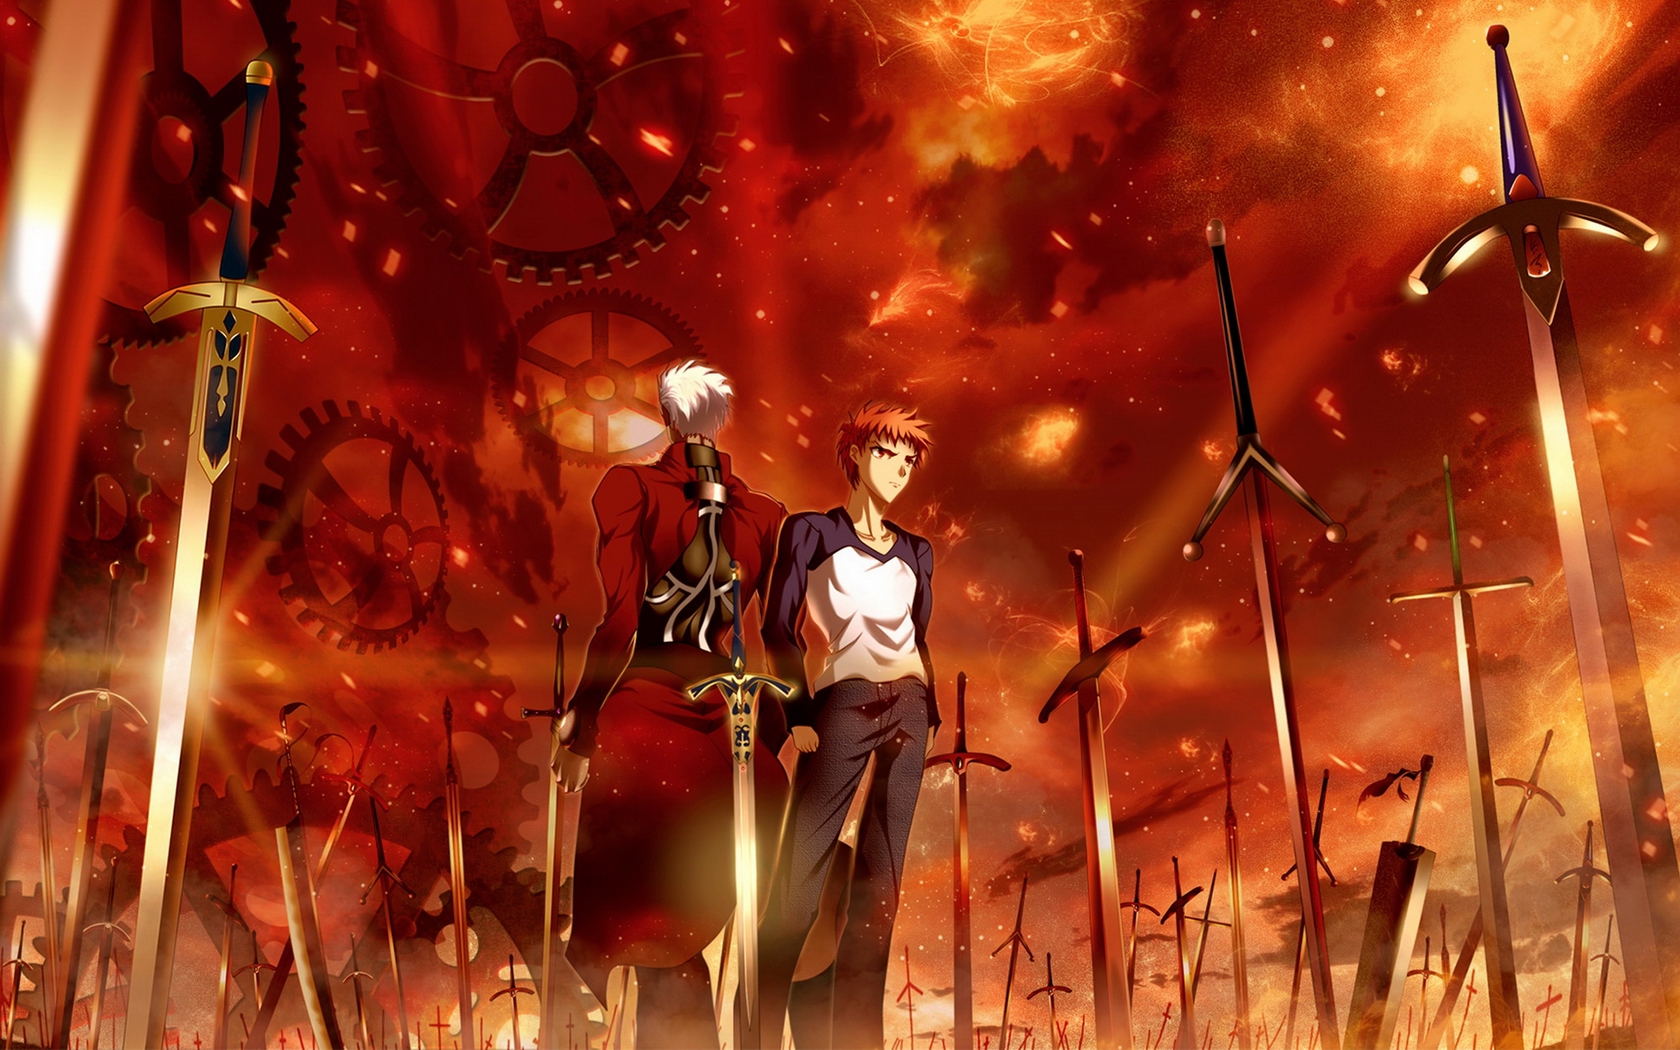  FateStay Night Unlimited Blade Works HD Wallpapers Backgrounds